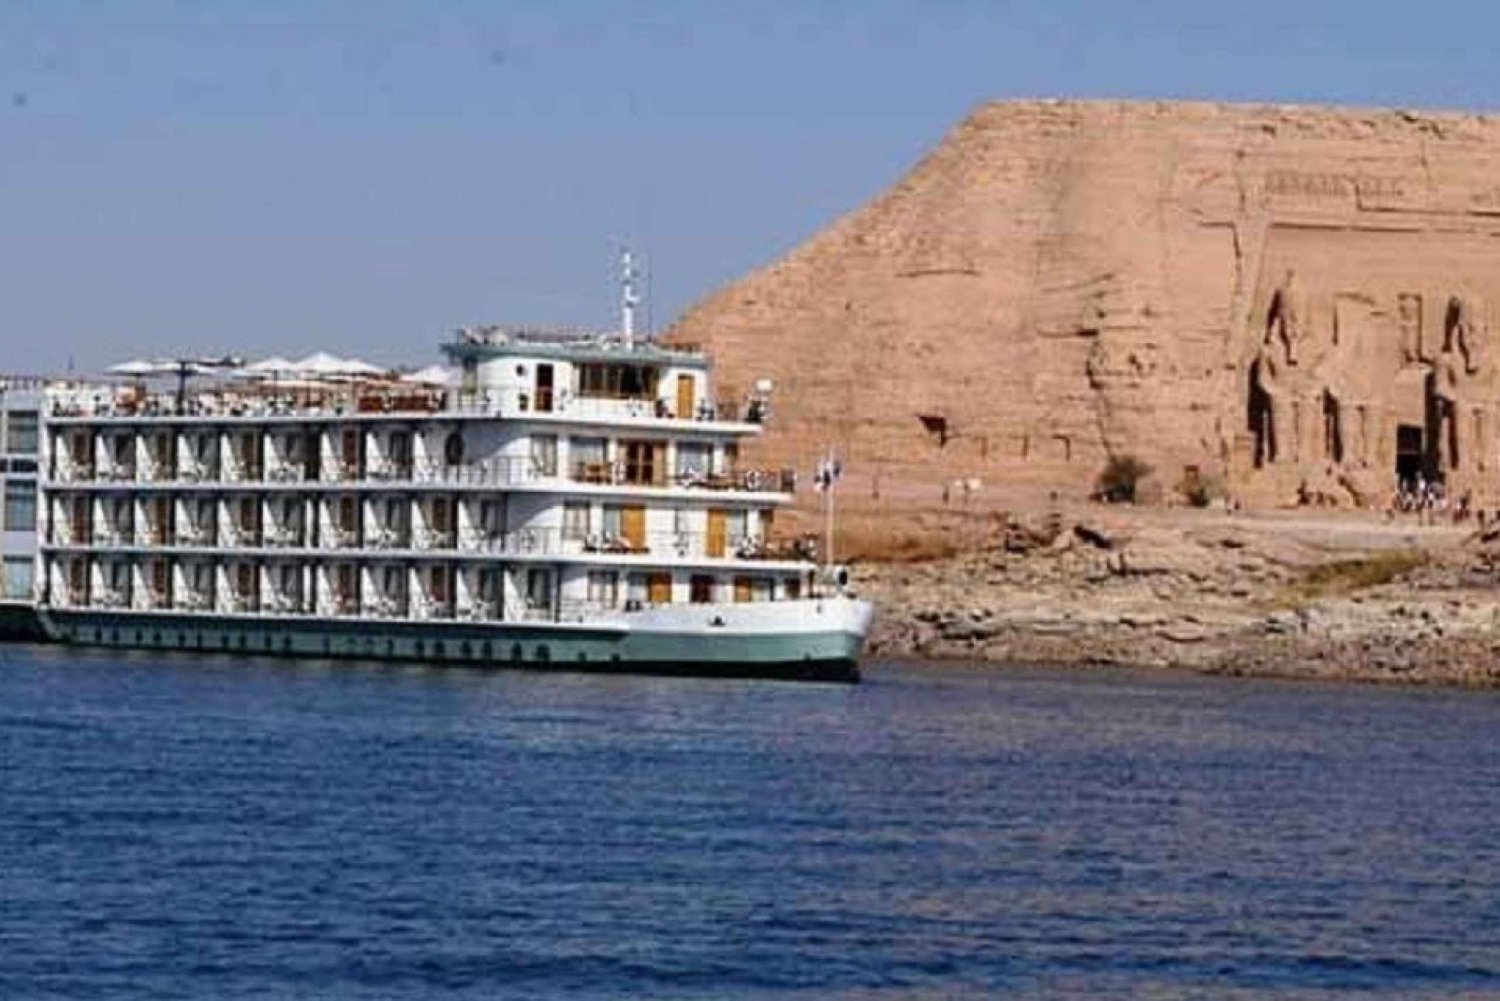 Cairo: 9-day Egypt Private Tour with Flights and Nile Cruise